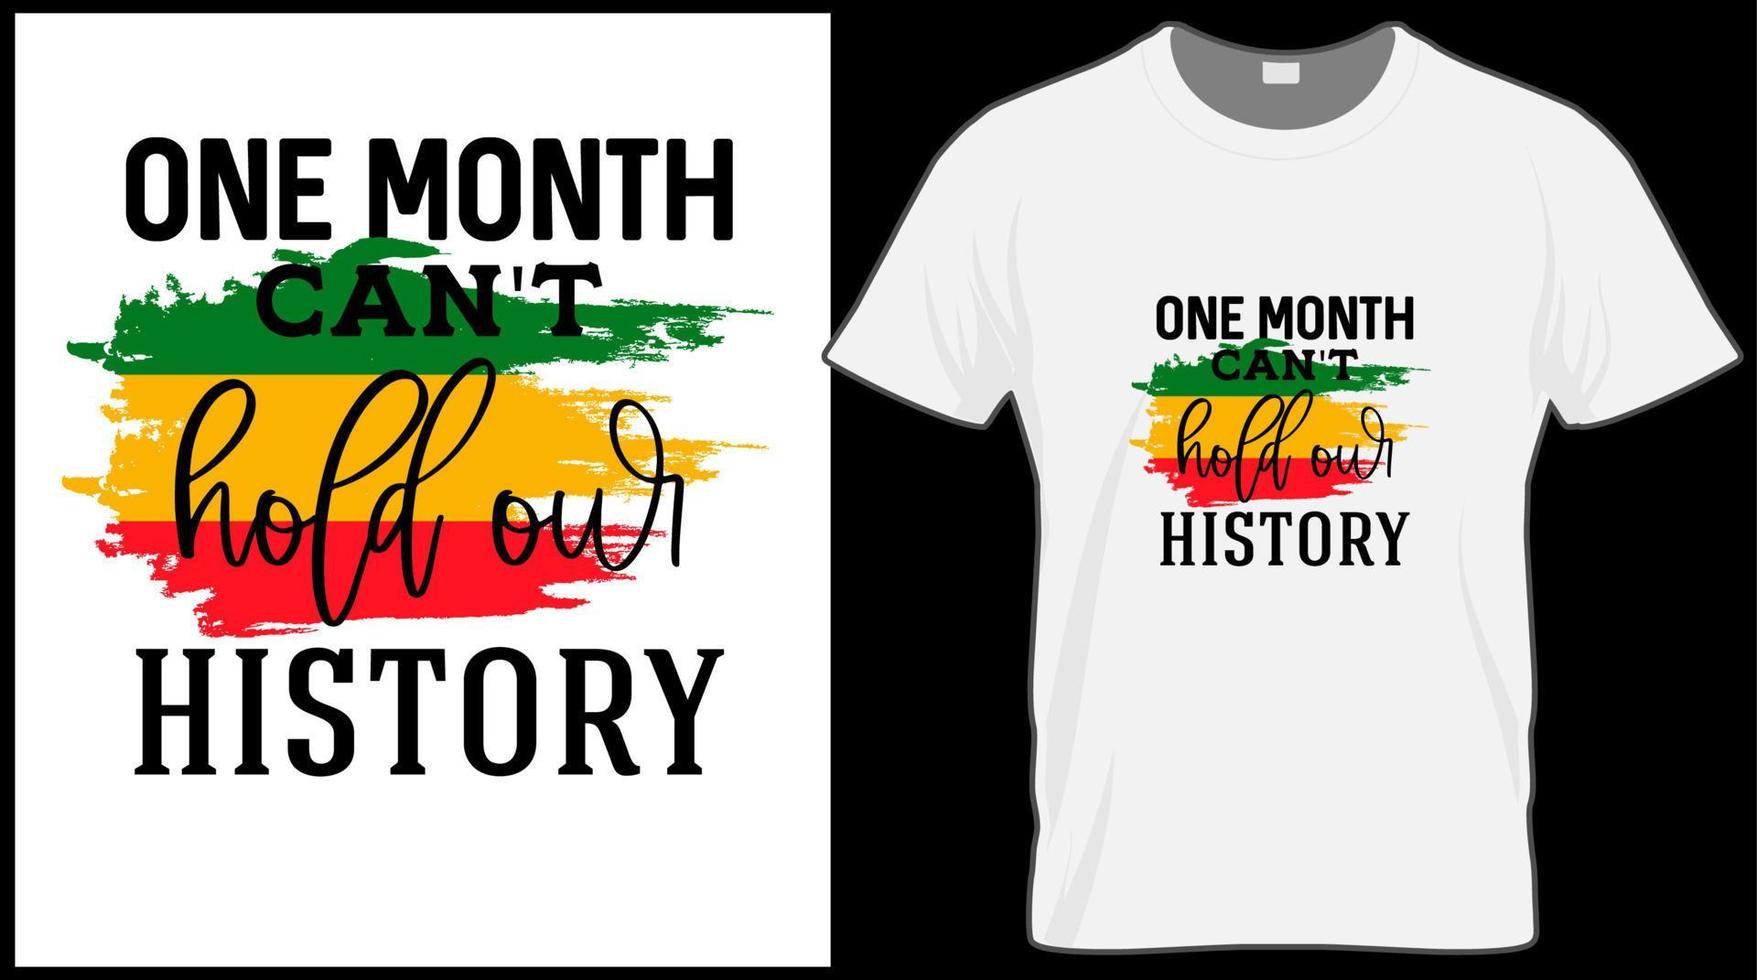 one month can't hold our history t shirt. Black History Month vector illustration graphic. Green, red, yellow background with text. Celebrate American and African People culture.